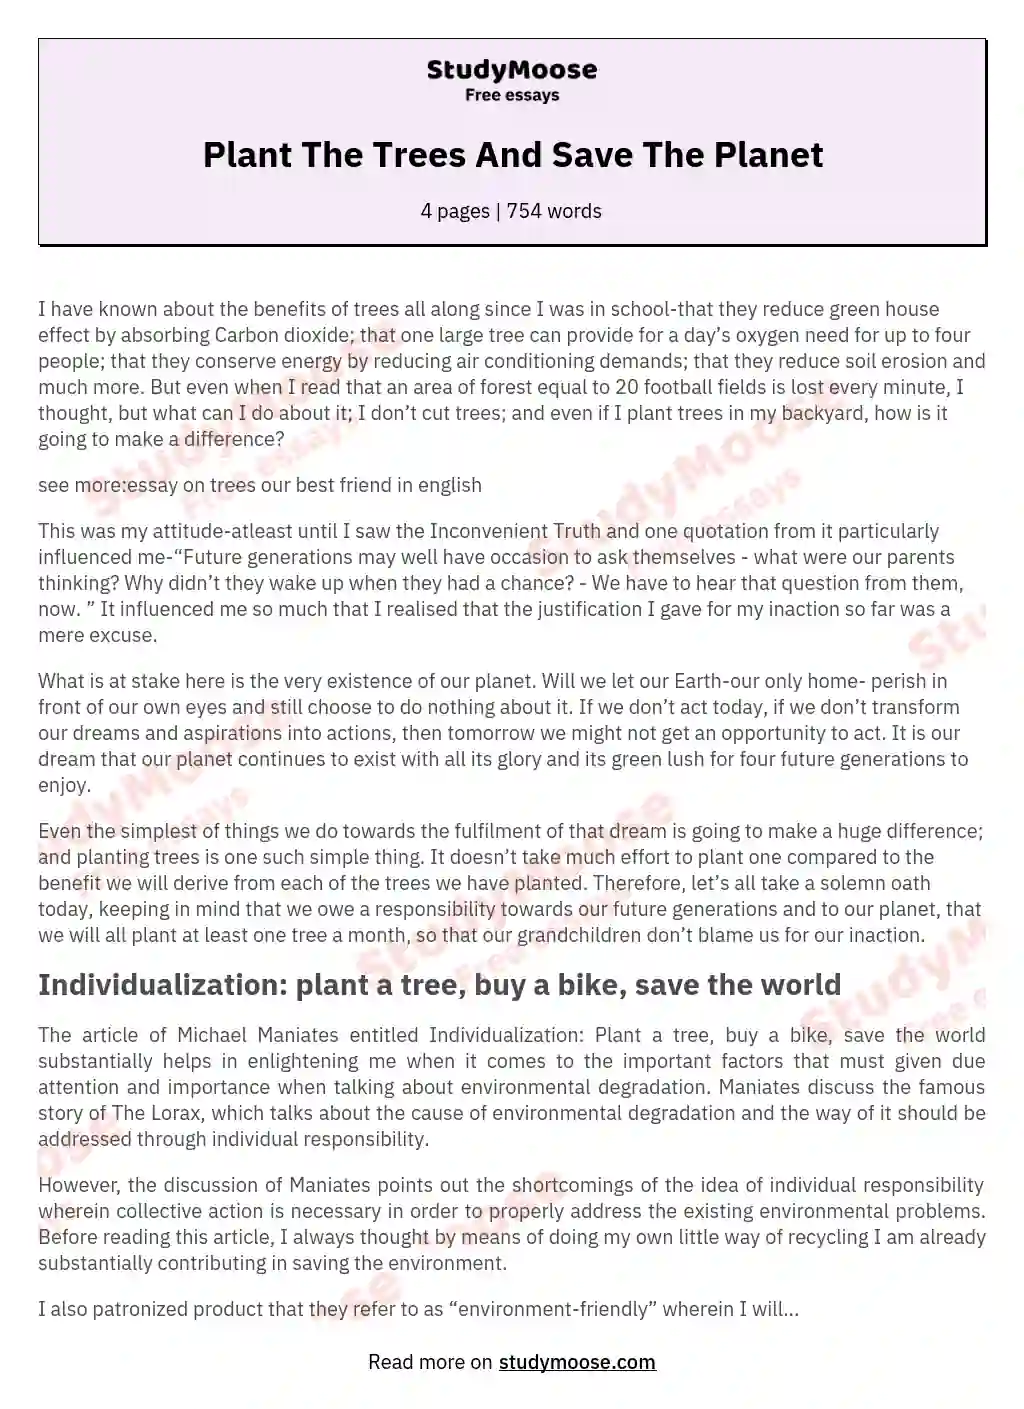 Plant The Trees And Save The Planet essay